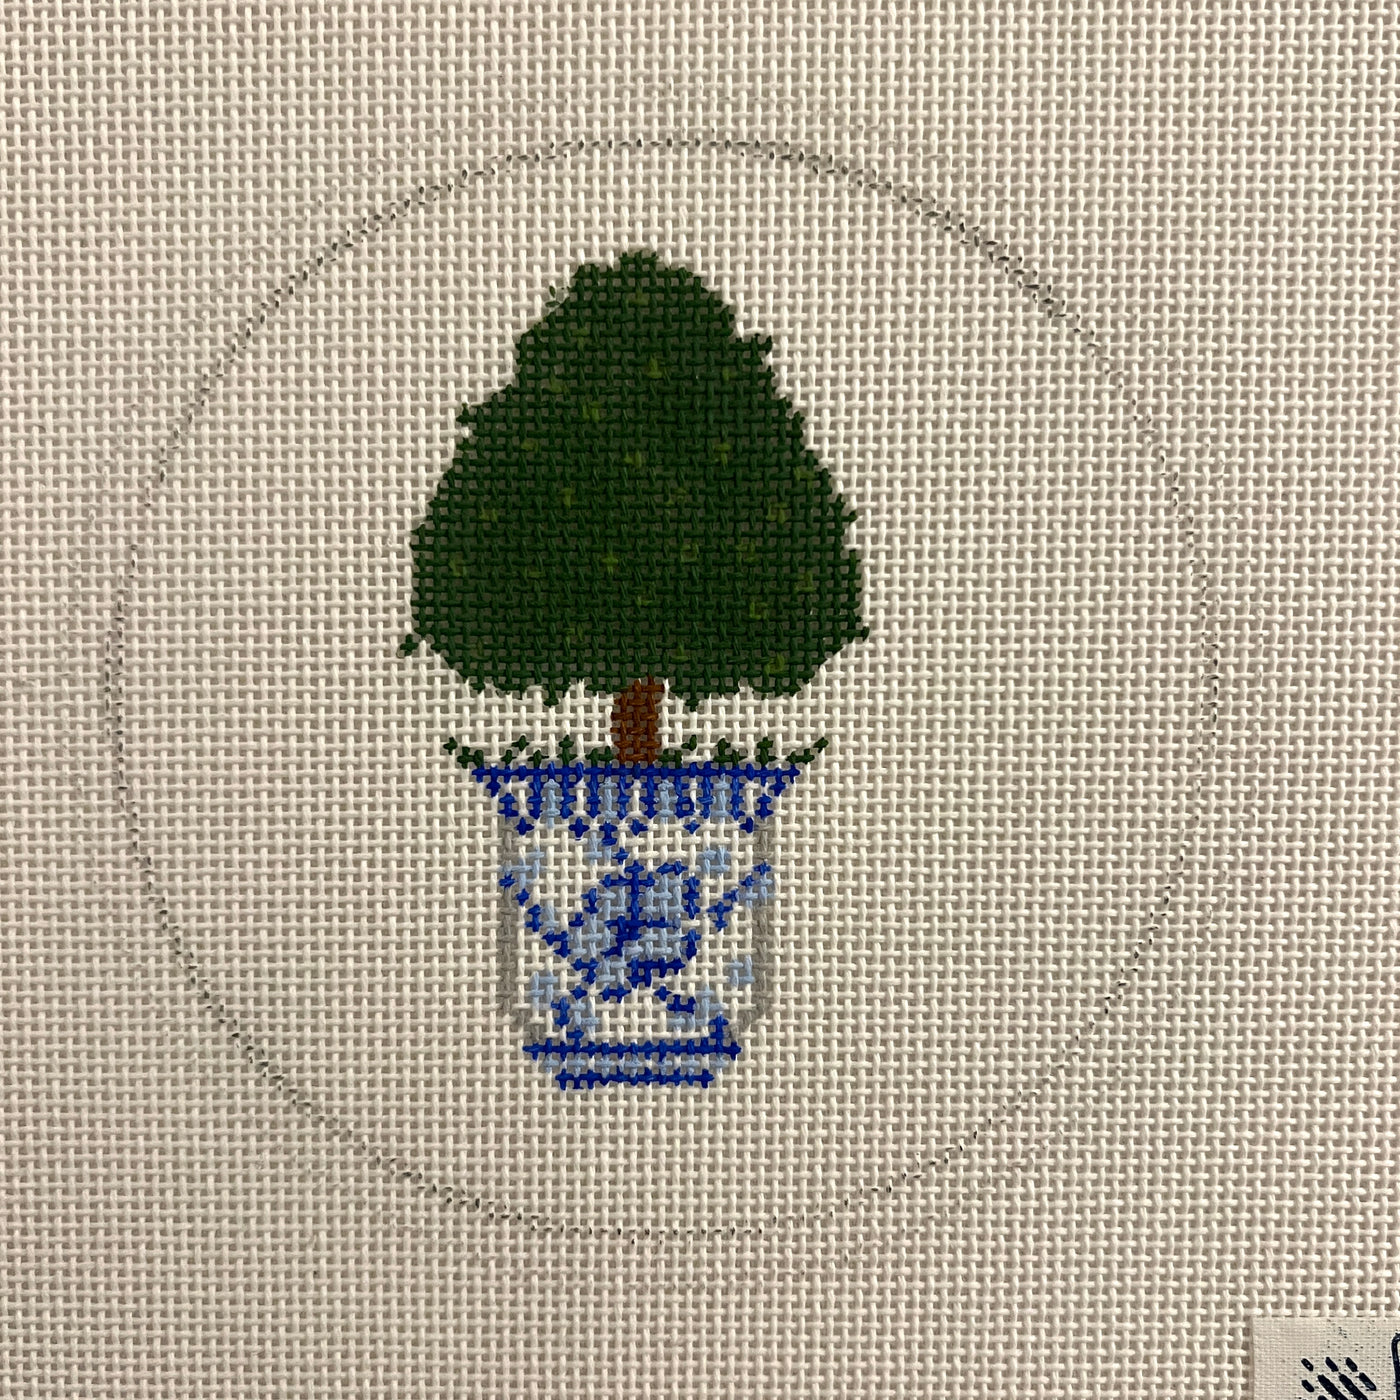 Summer Topiary Ornament & Stitch Guide Needlepoint Canvas